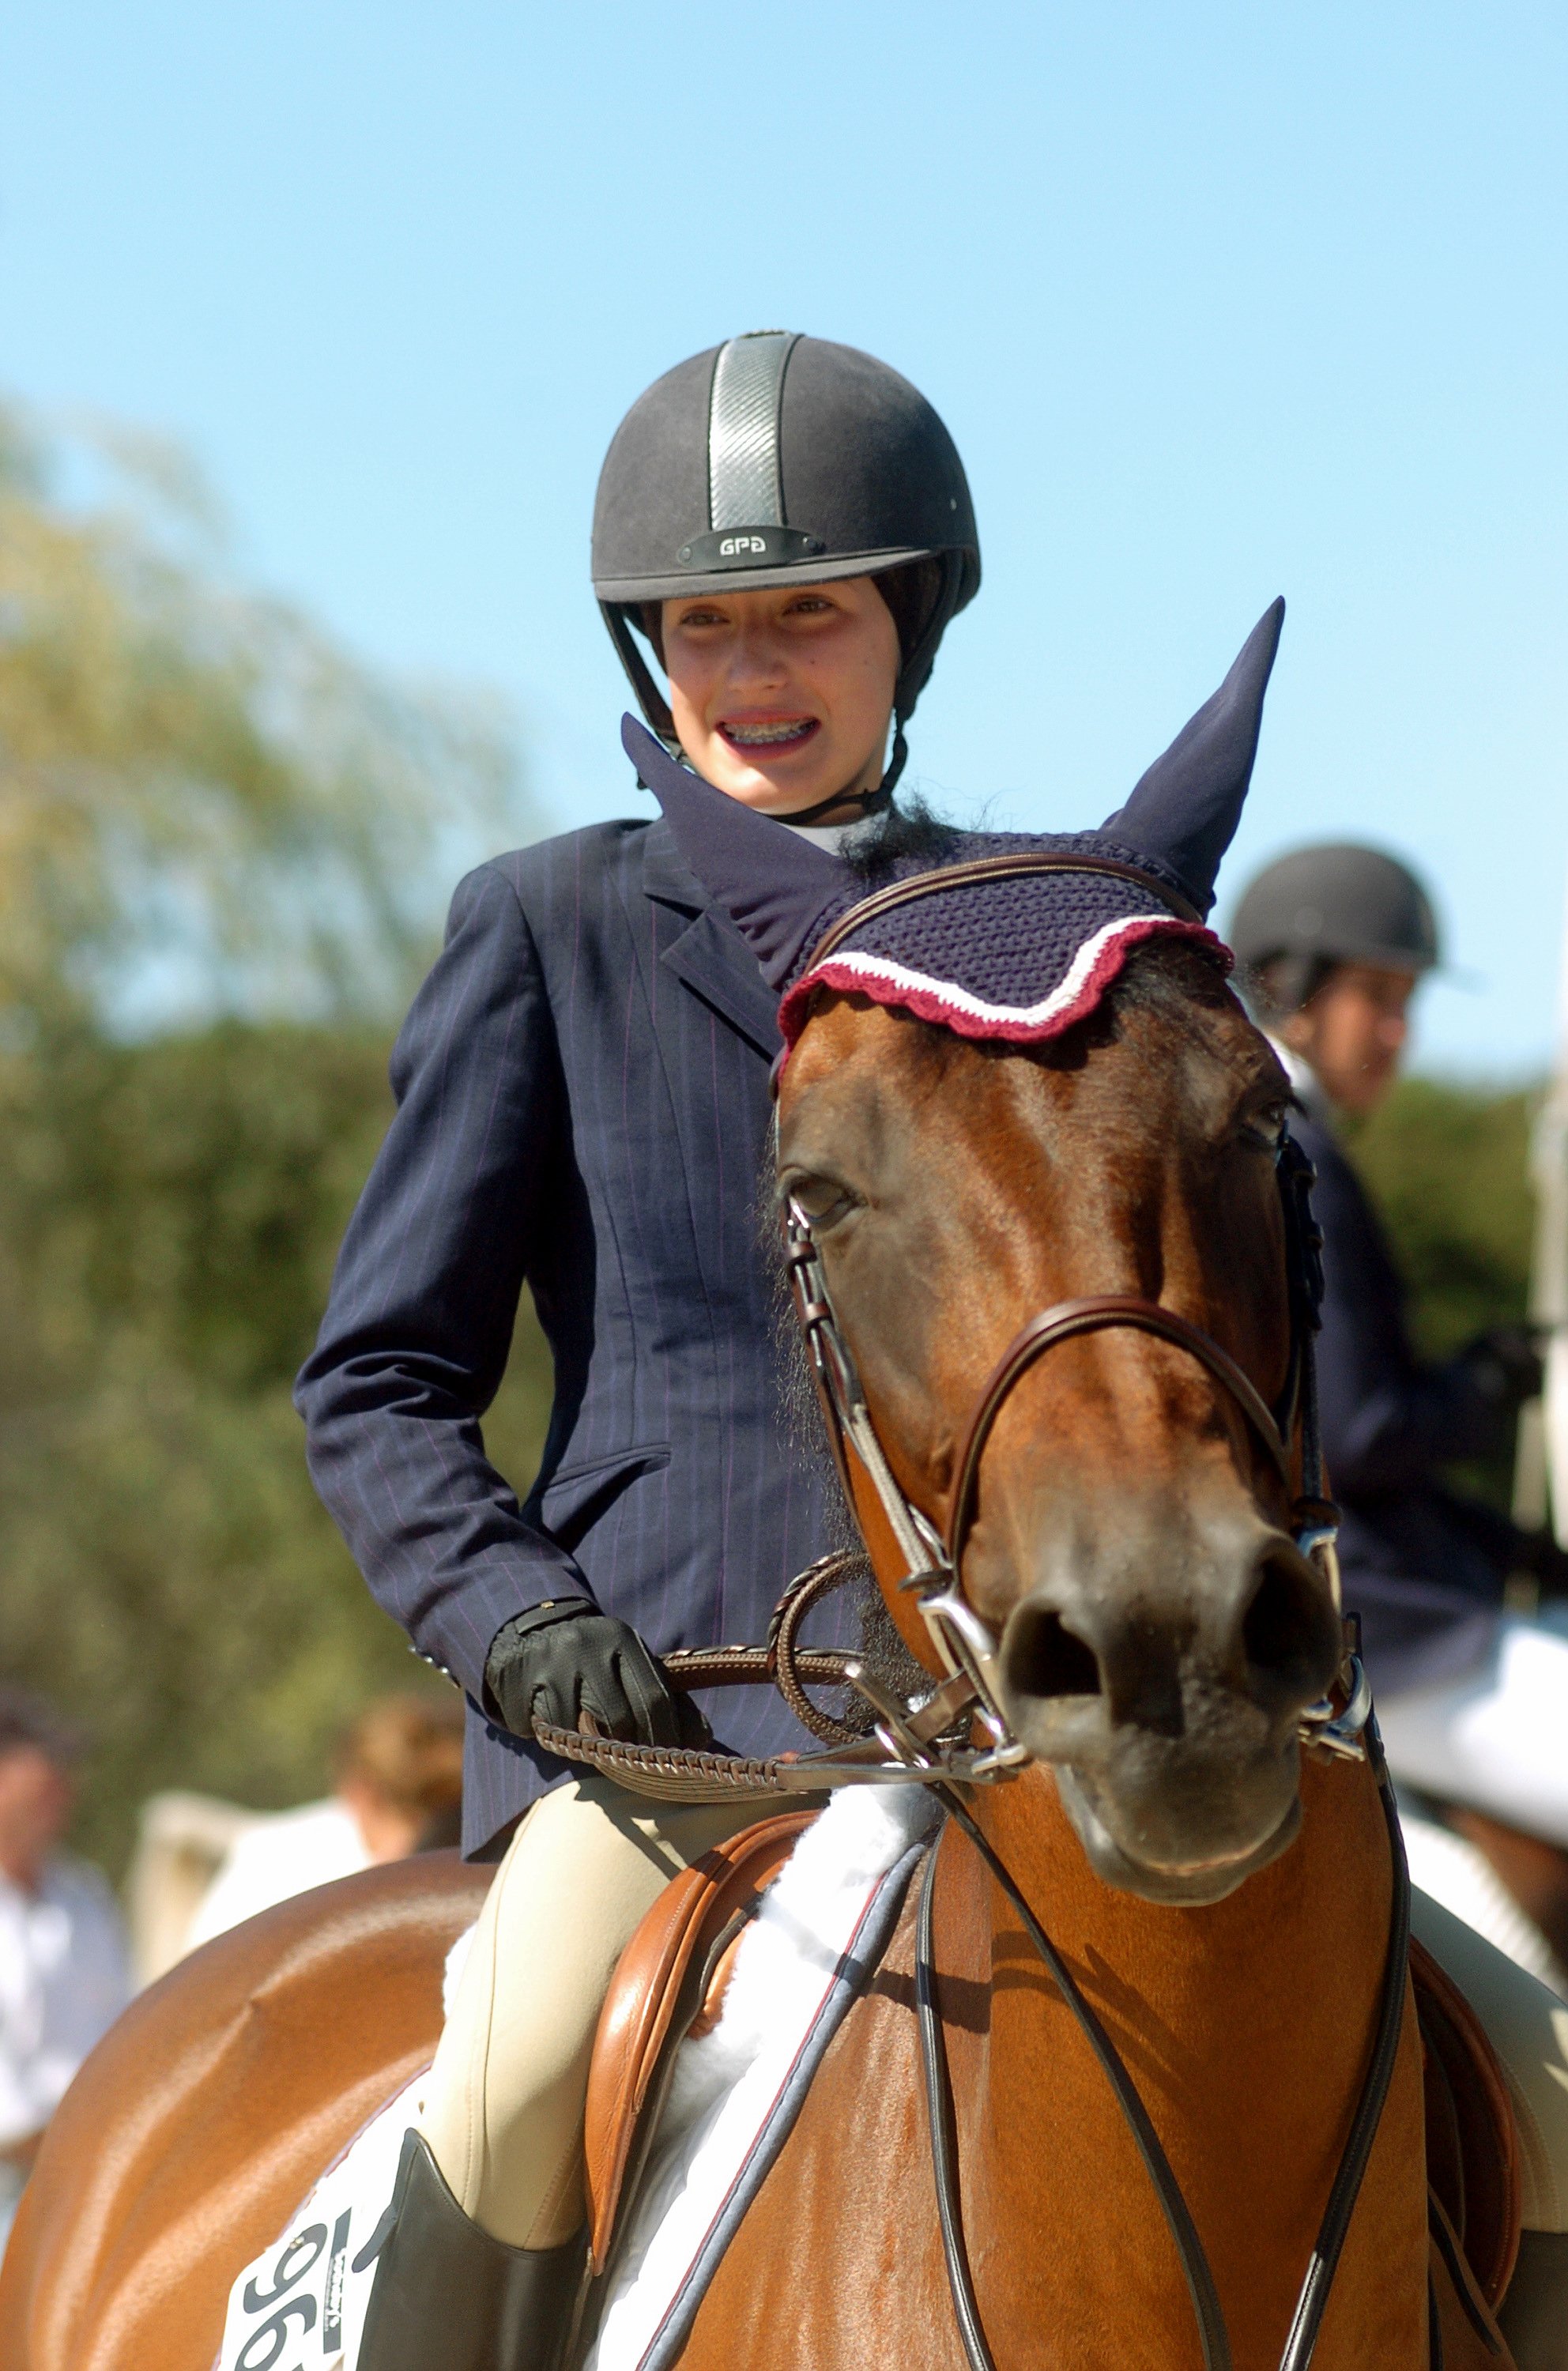 Jessica Springsteen grins as she rides her horse, Presto, during the 30th annual Hampton Classic Horse Show in Bridgehampton in 2005 | Source: Getty Images